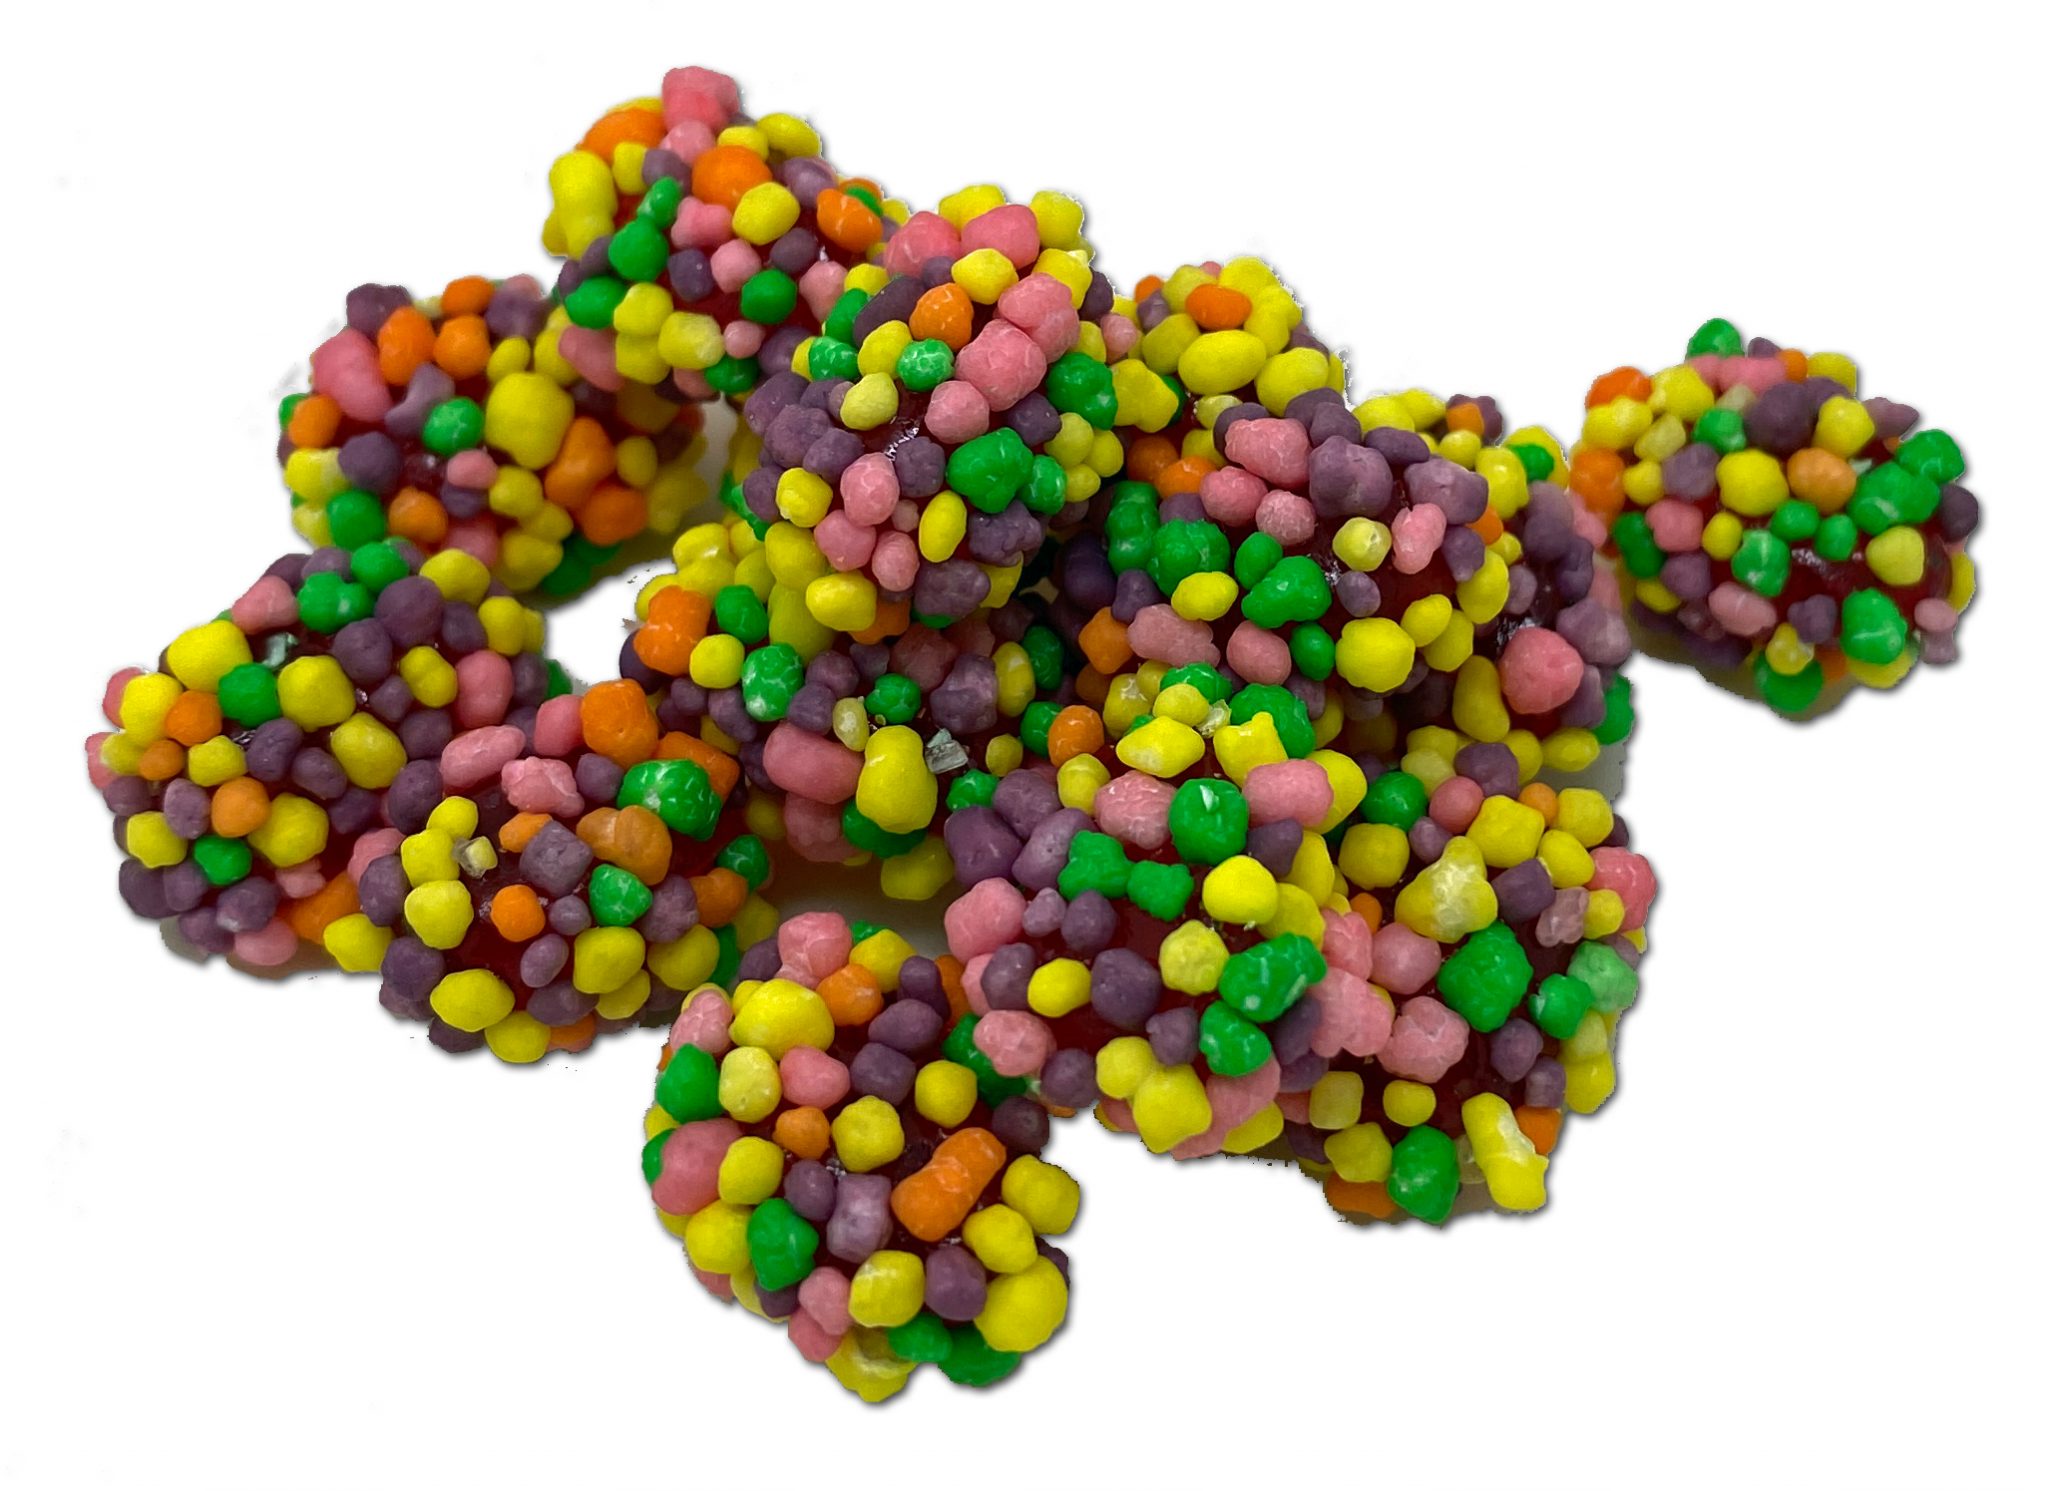 nerd candy clusters